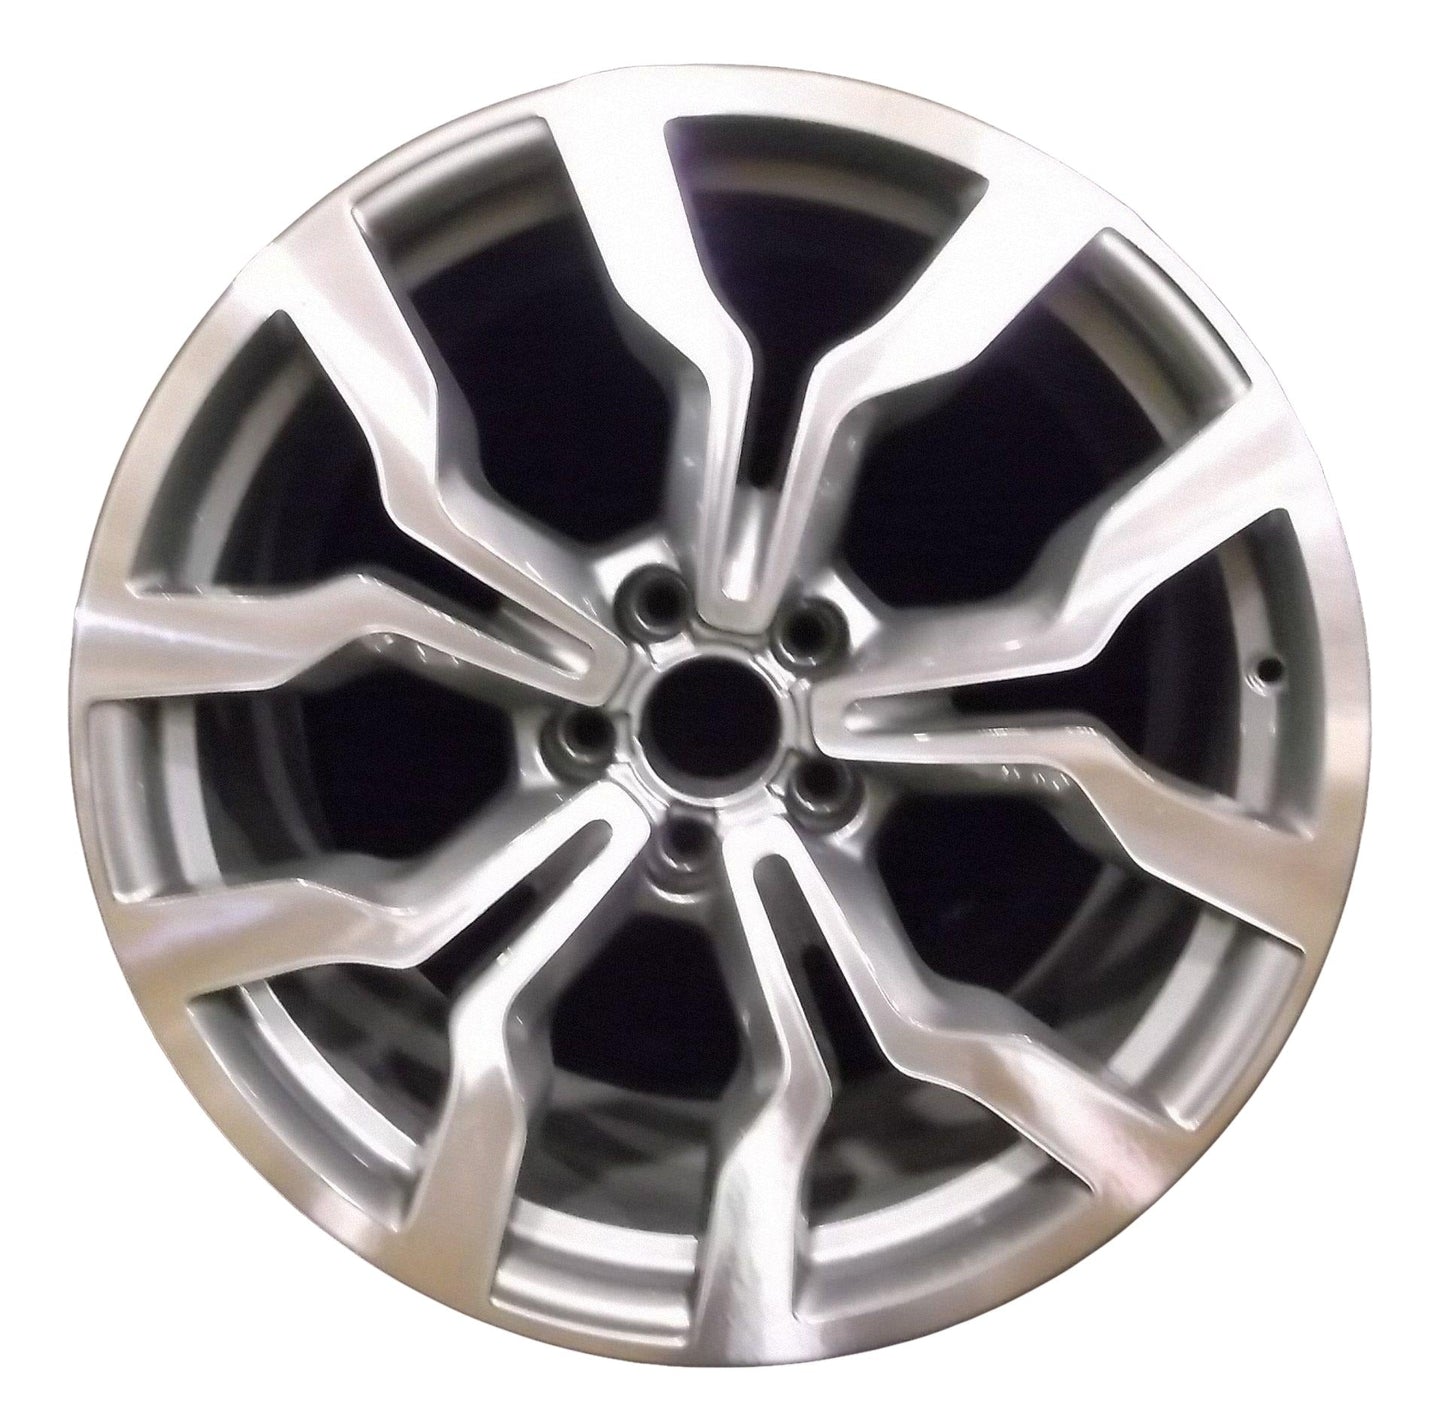 Audi R8  2010, 2011, 2012, 2013, 2014, 2015 Factory OEM Car Wheel Size 19x11 Alloy WAO.58857RE.LC23.MA